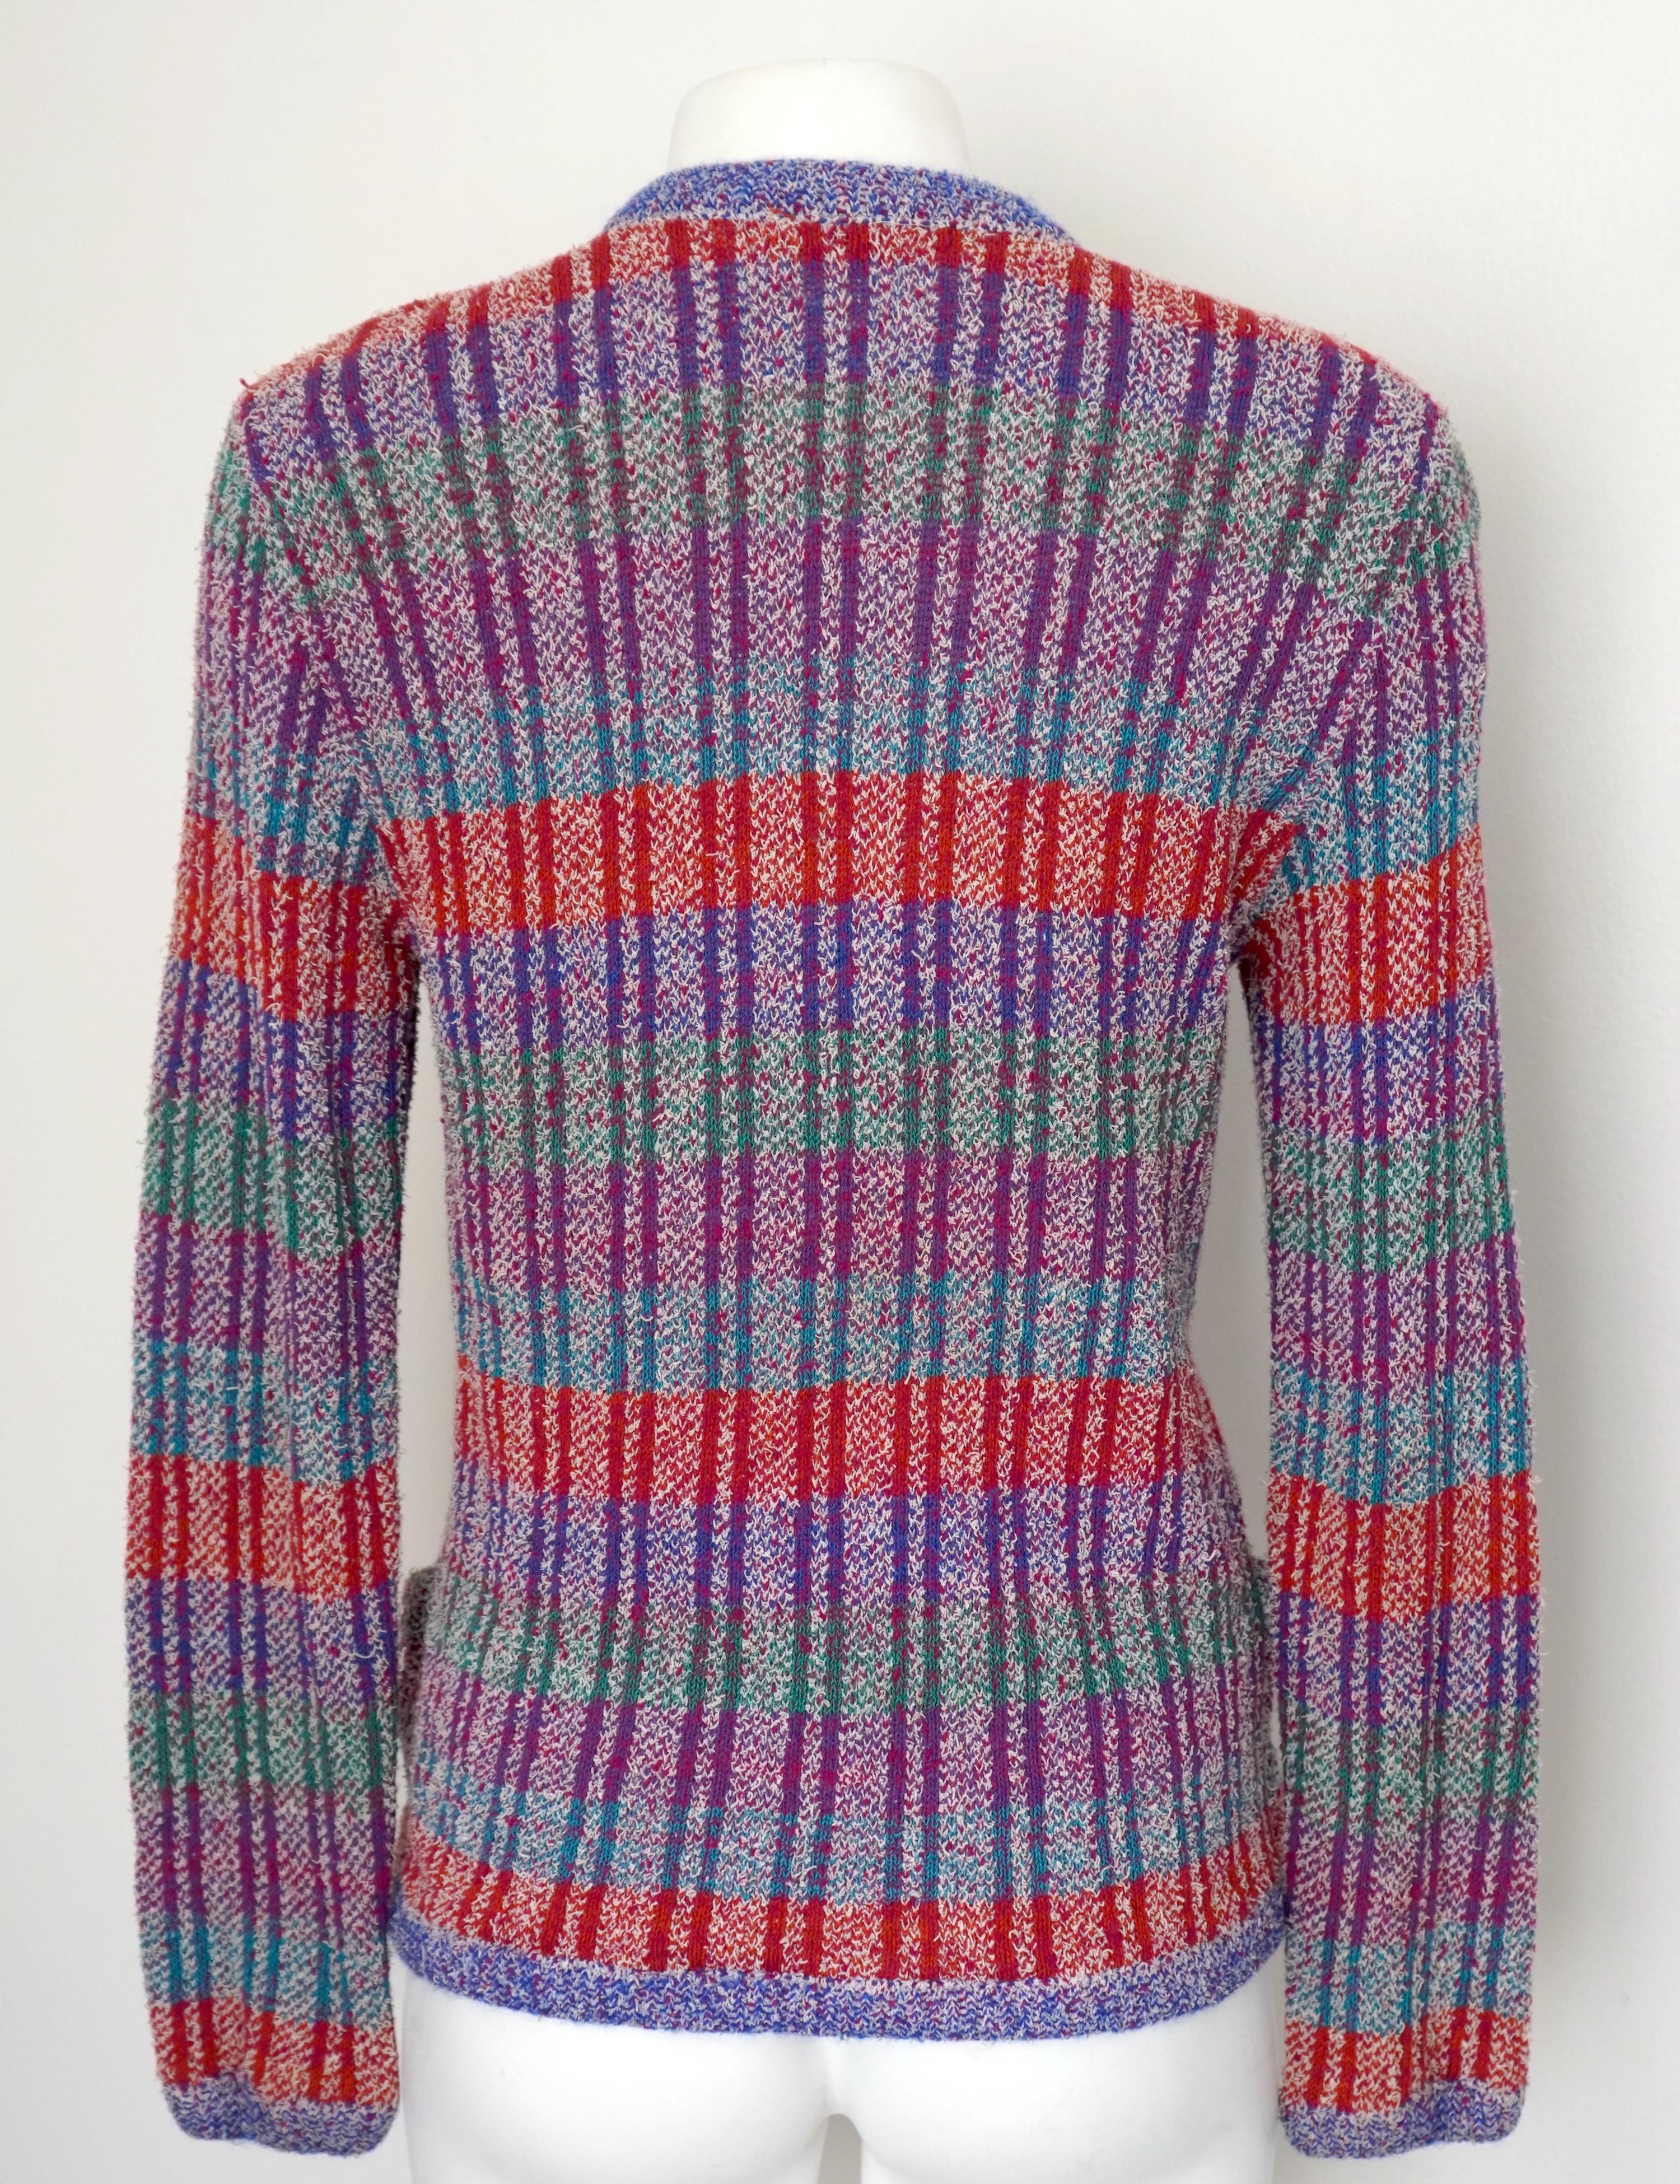 Missoni Colorful Striped Cardigan Sweater  In Excellent Condition For Sale In Beverly Hills, CA